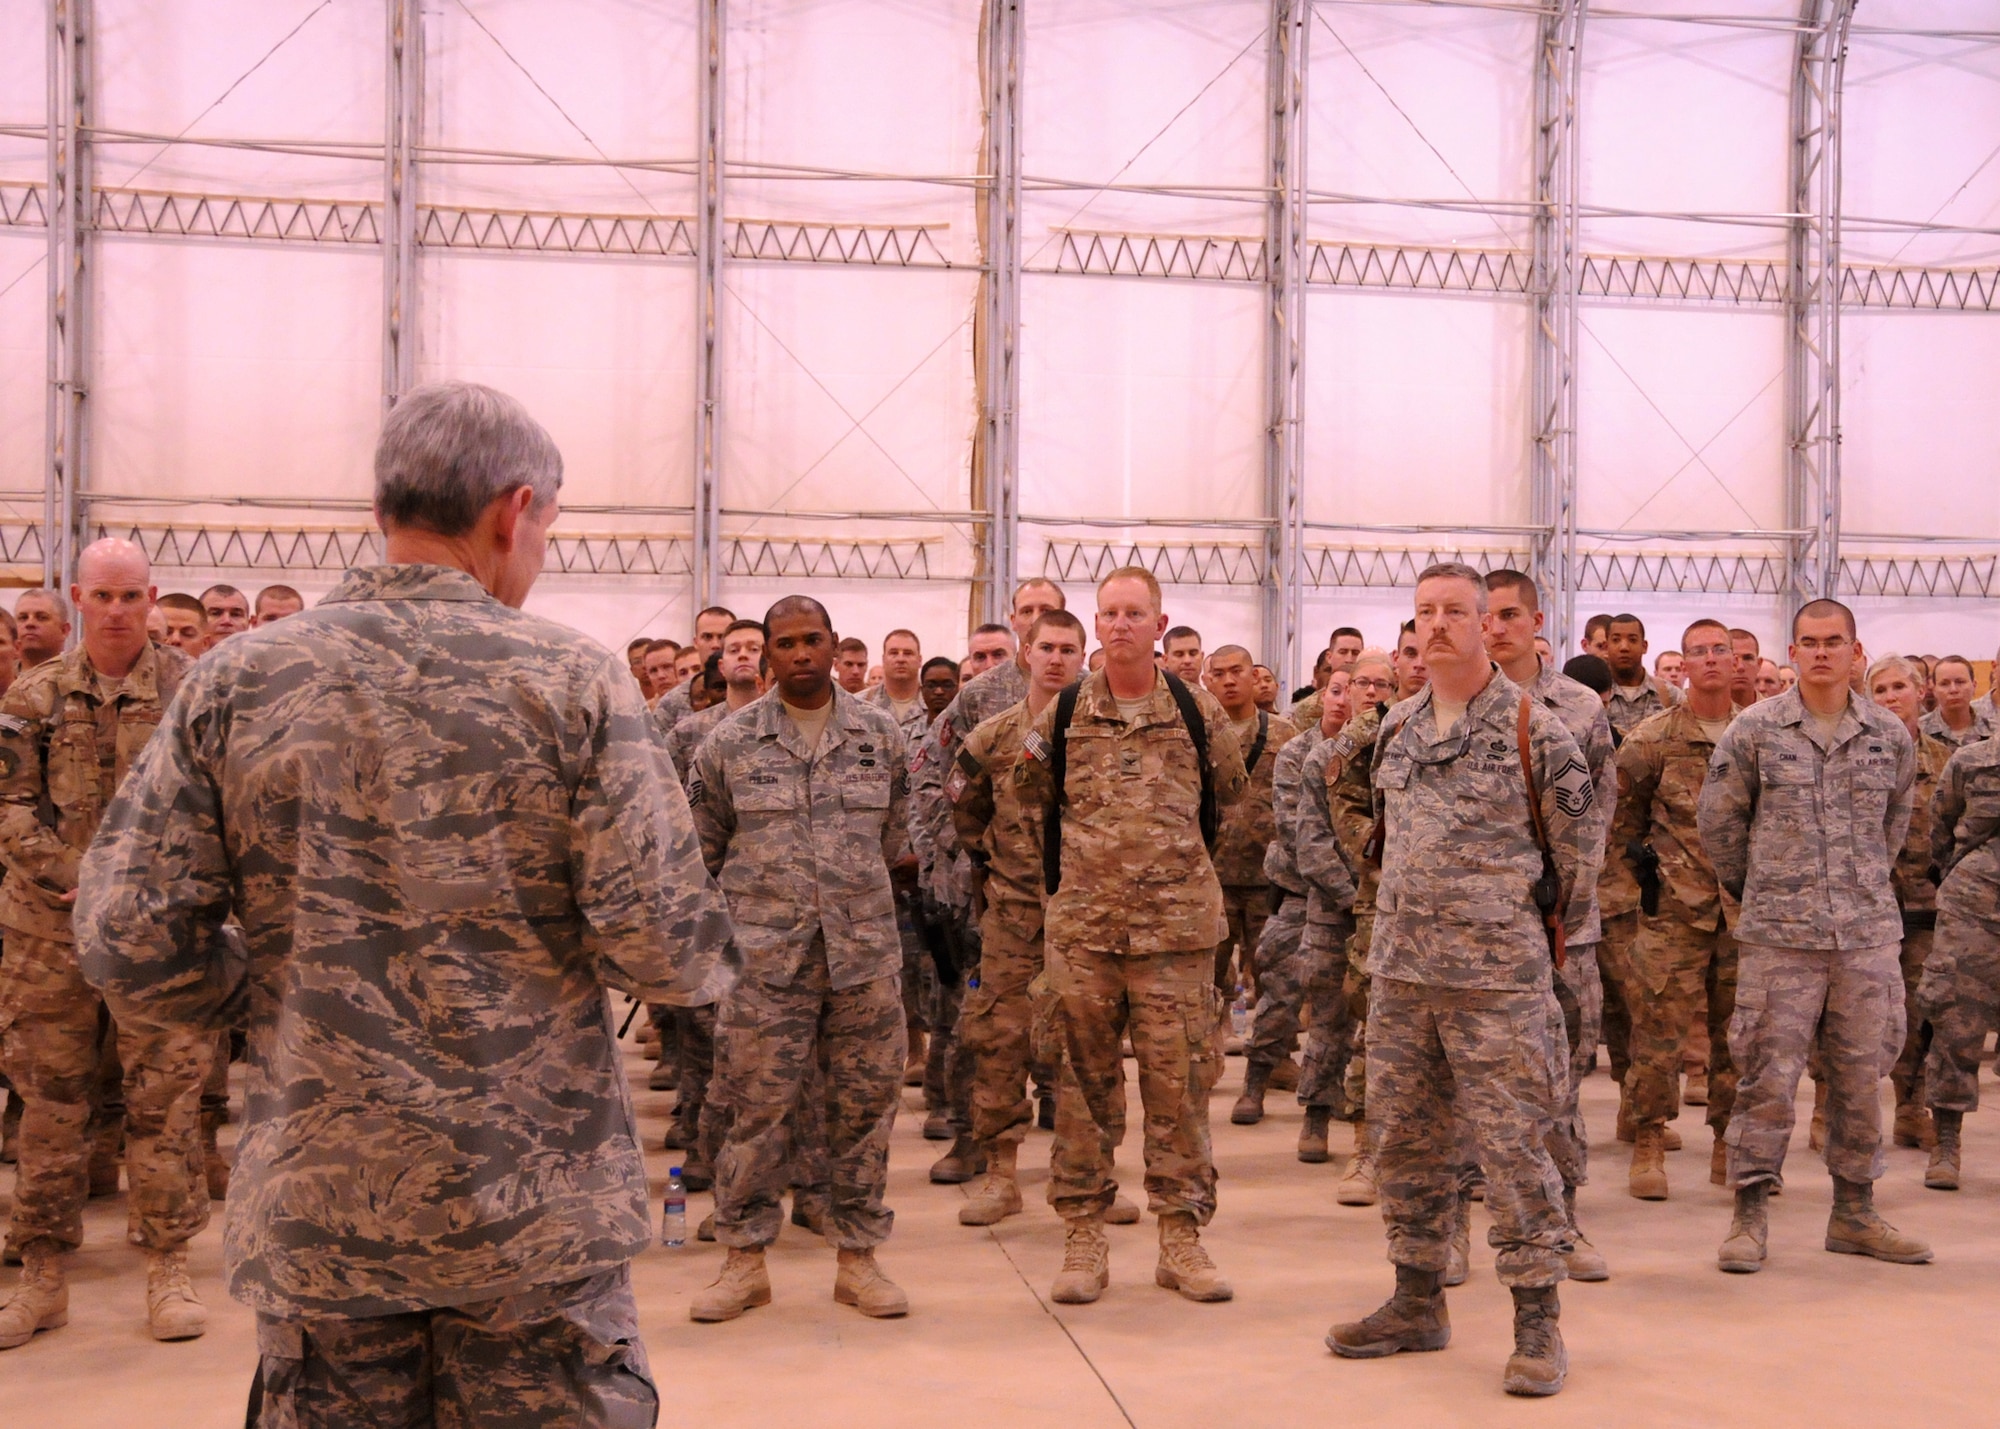 Air Force Chief of Staff Gen. Norton Schwartz addresses 451st Air Expeditionary Wing members during an all-call at Kandahar Airfield, Afghanistan, April 24, 2012. Schwartz spoke about future capabilities and maintaining the Air Force's balance. Schwartz spoke about the Air Force’s future and the importance of maintaining the right balance of capabilities. (U.S. Air Force photo/Staff Sgt. Heather Skinkle)